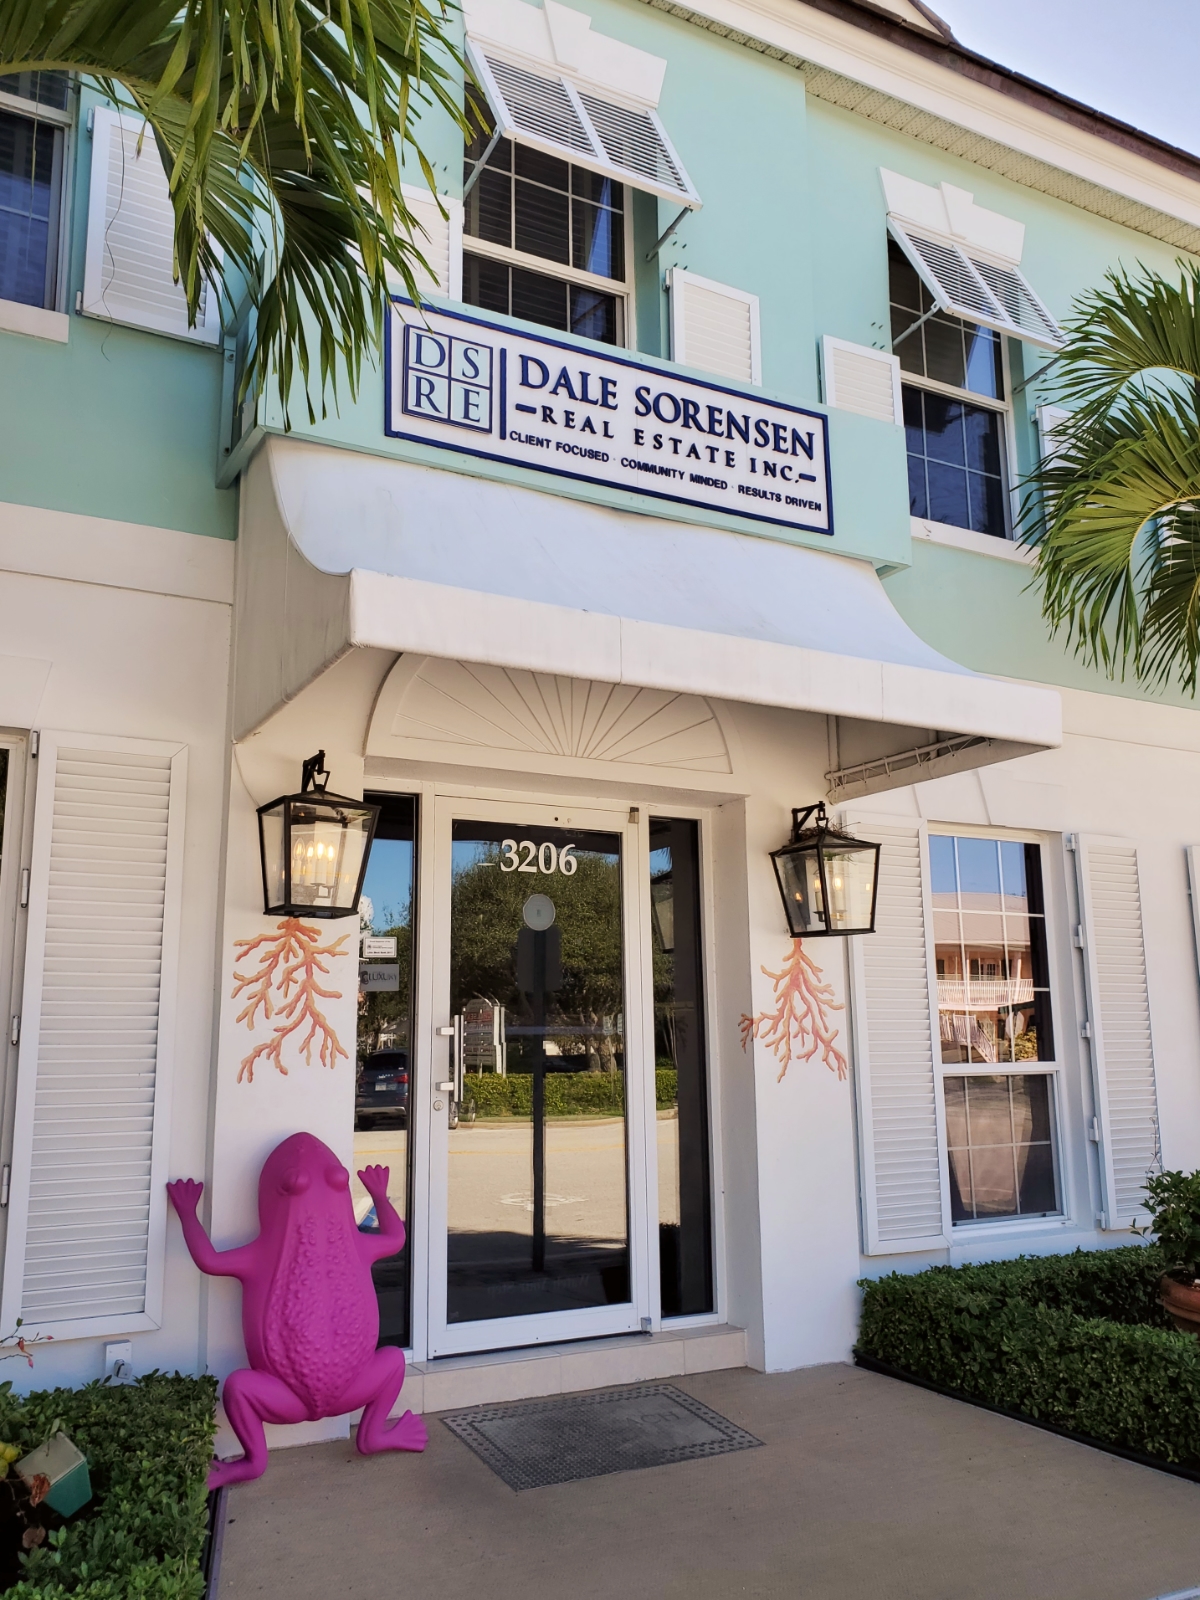 Downtown Vero Beach giant pink frog at real estate office entry